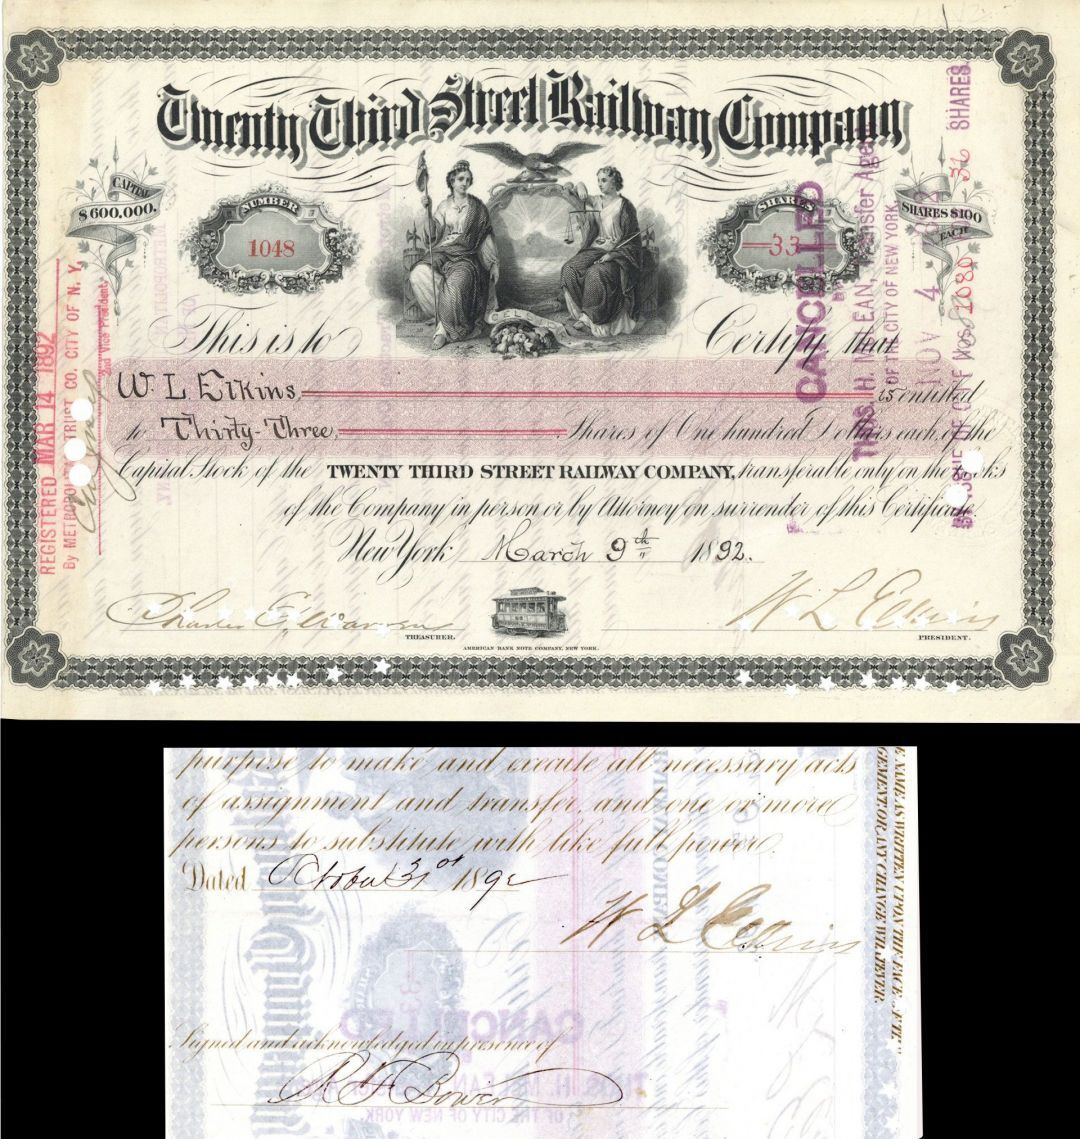 Twenty Third Street Railway Co. Issued to and Signed by W.L. Elkins - Stock Cert